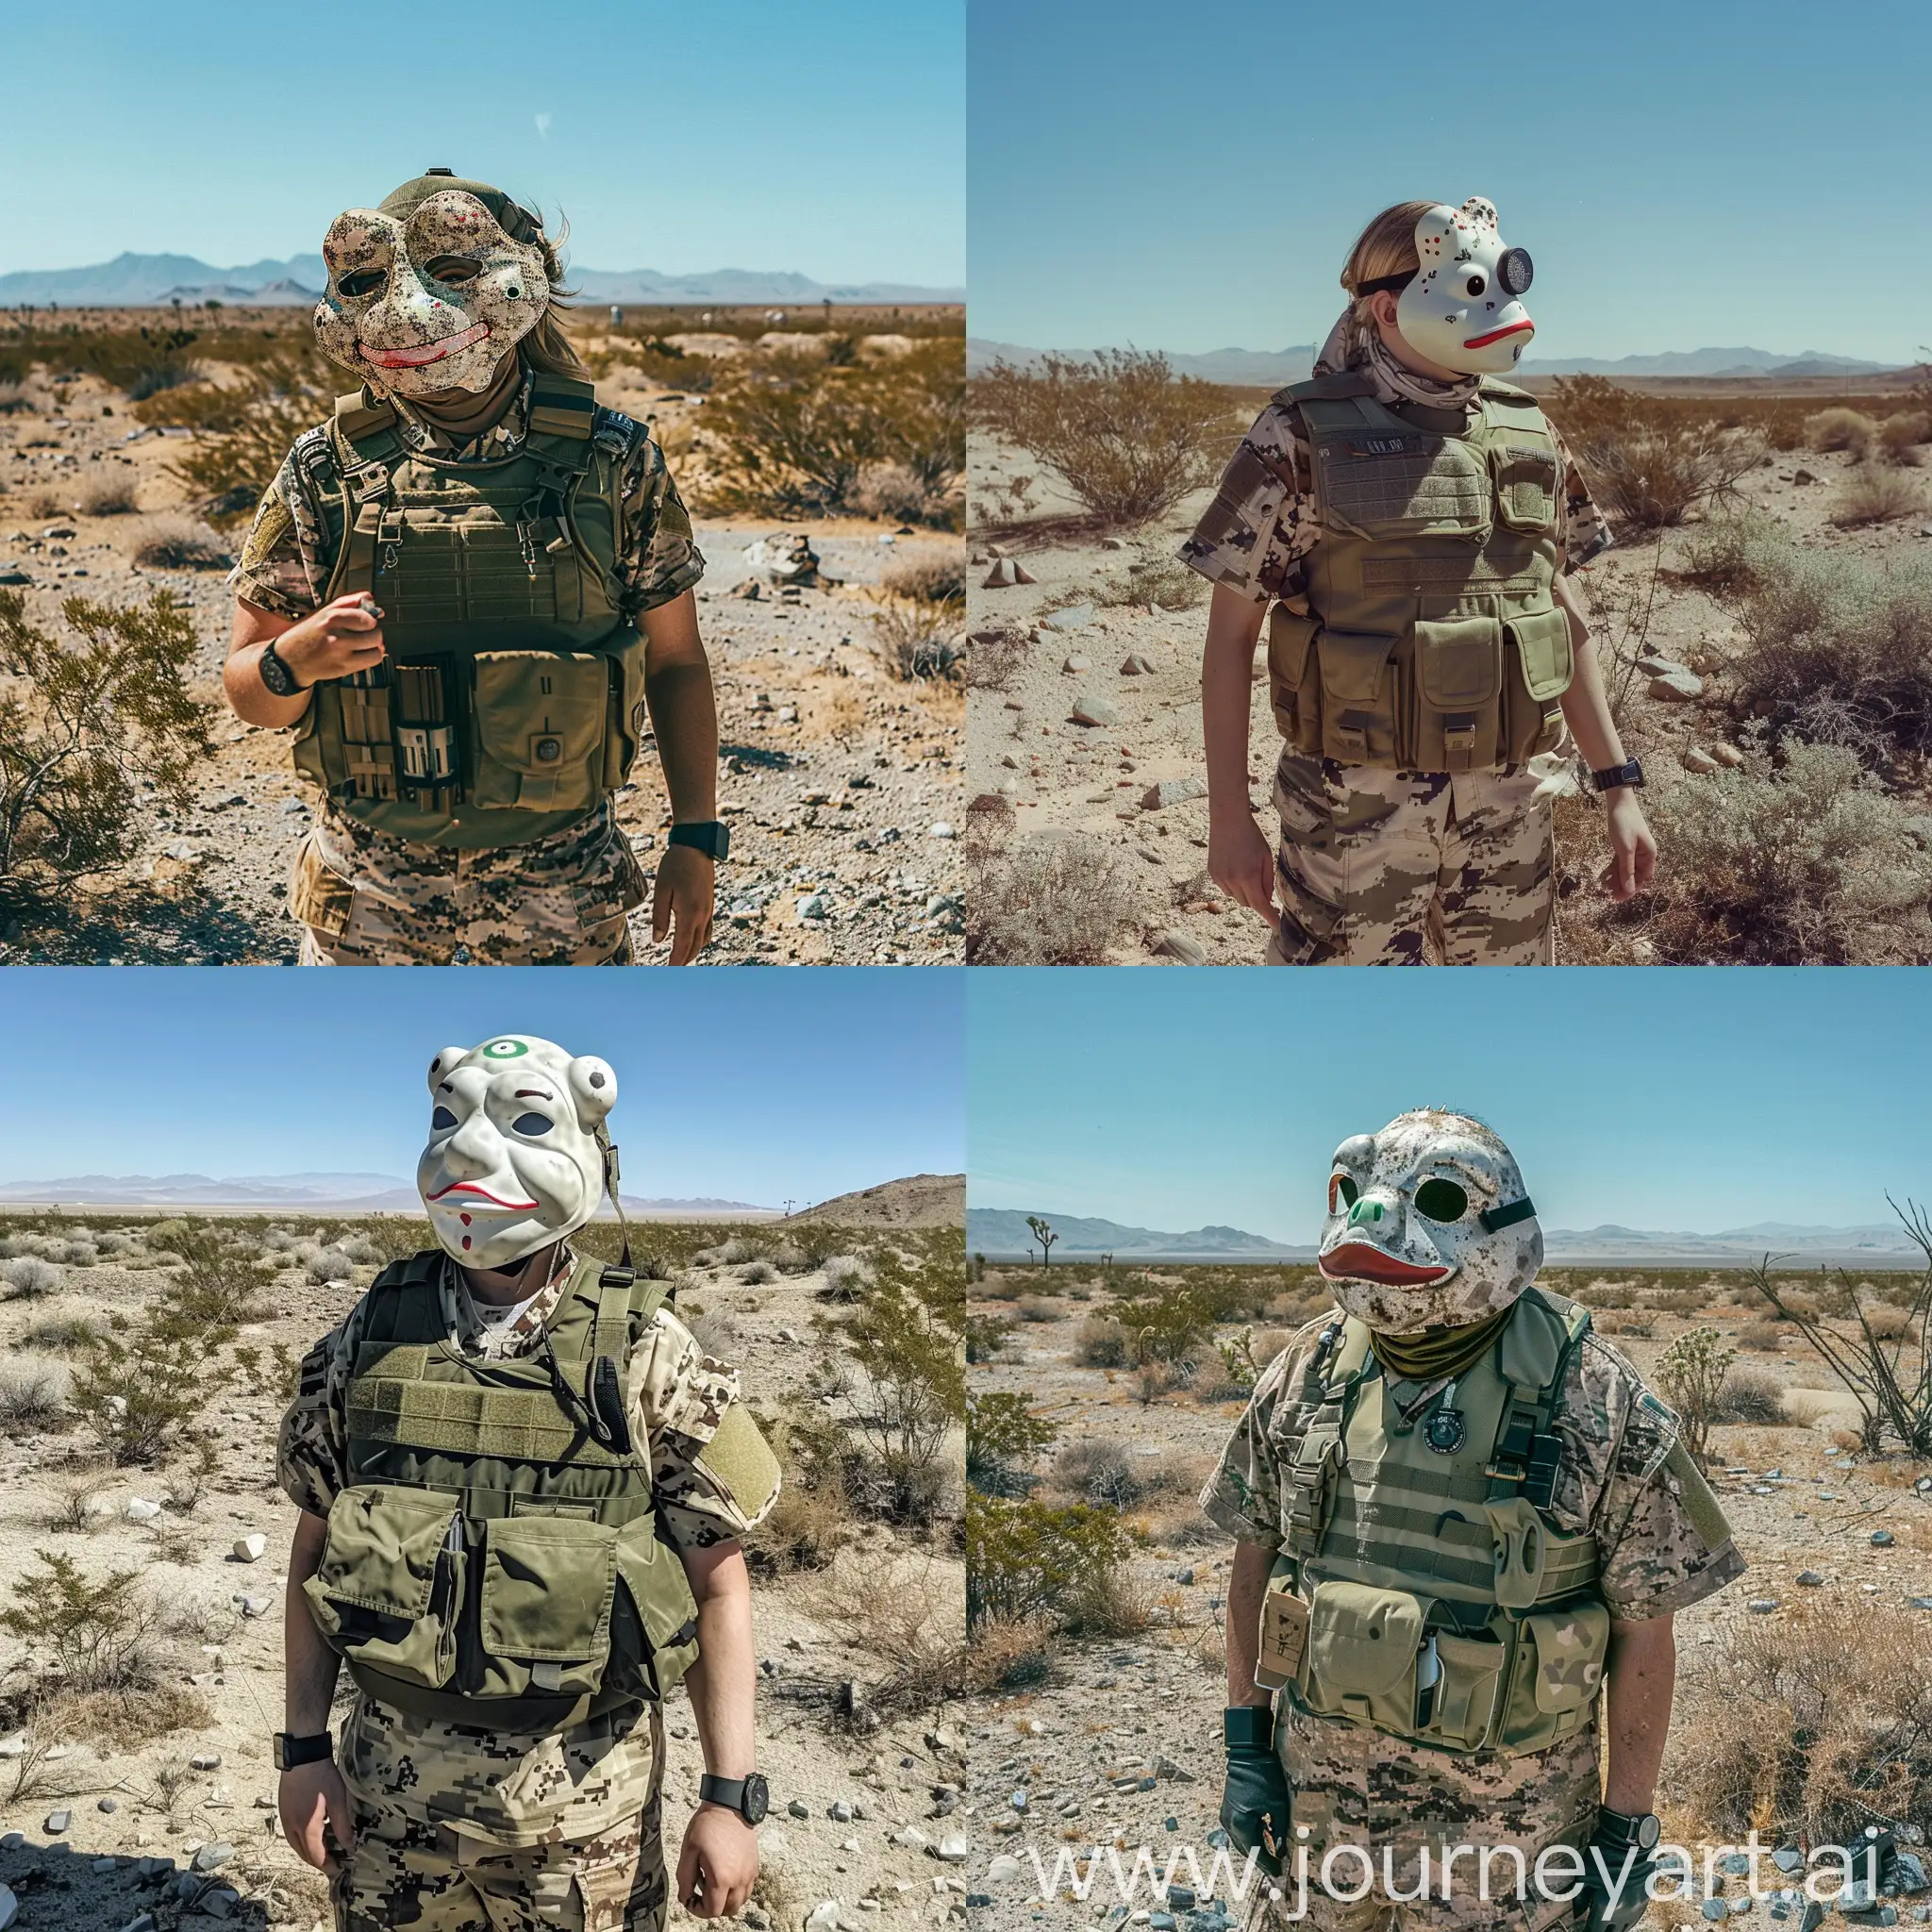 A person wearing a Pepe the Frog mask, olive green tactical vest with pouches, desert camouflage shirt with rolled-up sleeves, black wristwatch on the left wrist, standing in an arid desert landscape, sparse desert vegetation, bushes, dry grass, rocky sandy terrain, scattered small stones, distant mountains, clear blue sky, 80s vintage photo